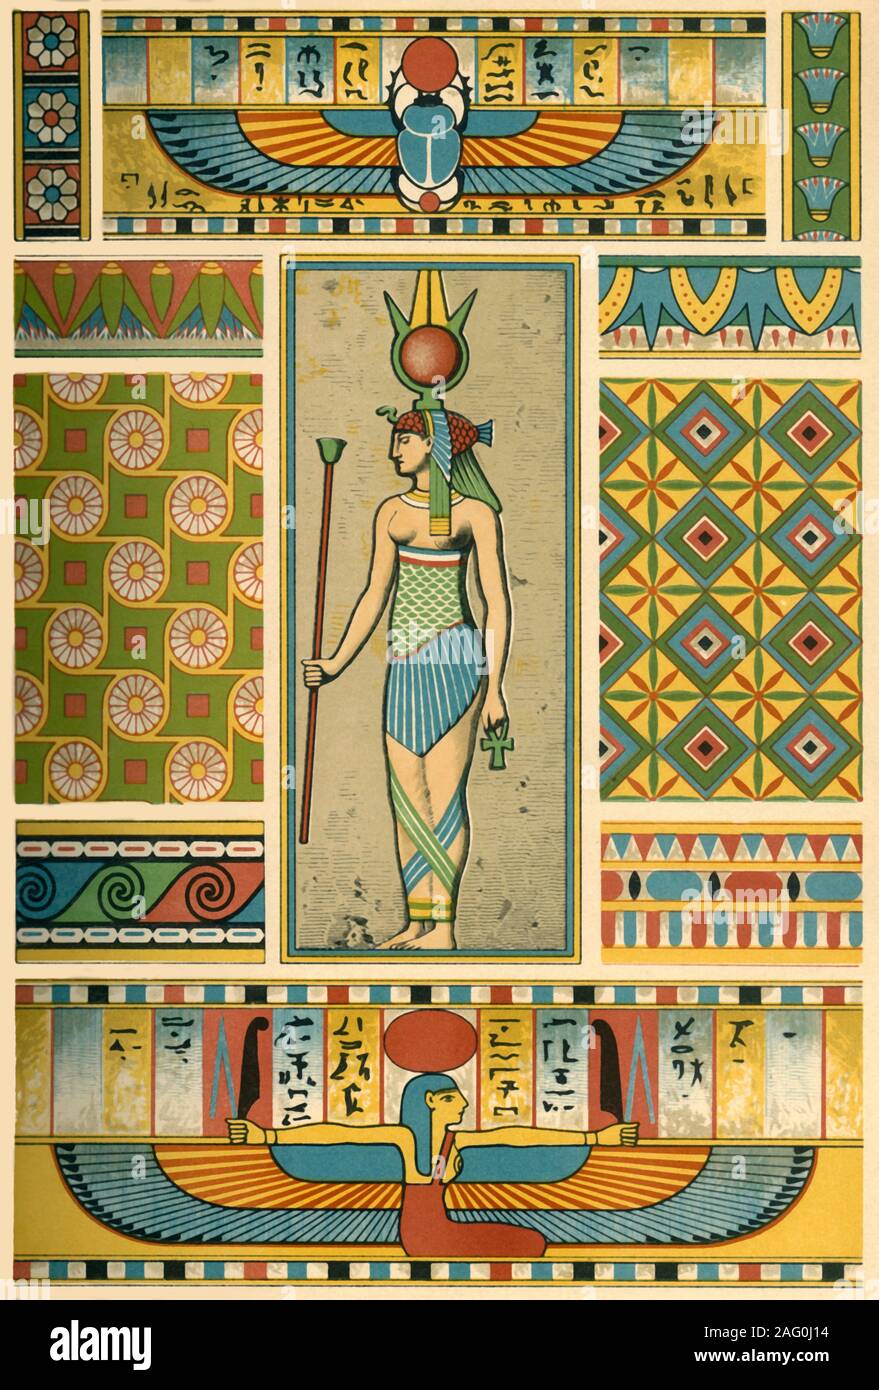 Ancient Egyptian decoration, (1898). Examples of architecture and painting from Ancient Egypt: 'Fig 1: Painted relief-figure from a column of the temple at Denderah. Figs 2 and 3: Paintings from mummy-cases. Figs 4 and 5: From a mummy-case in the Louvre, Paris. Fig 6: Painted border from a sarcophagus. Fig 7: Border from a mummy-case. British Museum, London. Fig 8: Ornament on wooden sarcophagus. London. Fig 9: Border on a mummy-case. British Museum. Fig 10: Portion of a collar. London. Fig 11: Painting on a sarcophagus. London'.  Plate 1 from &quot;The Historic Styles of Ornament&quot; transl Stock Photo